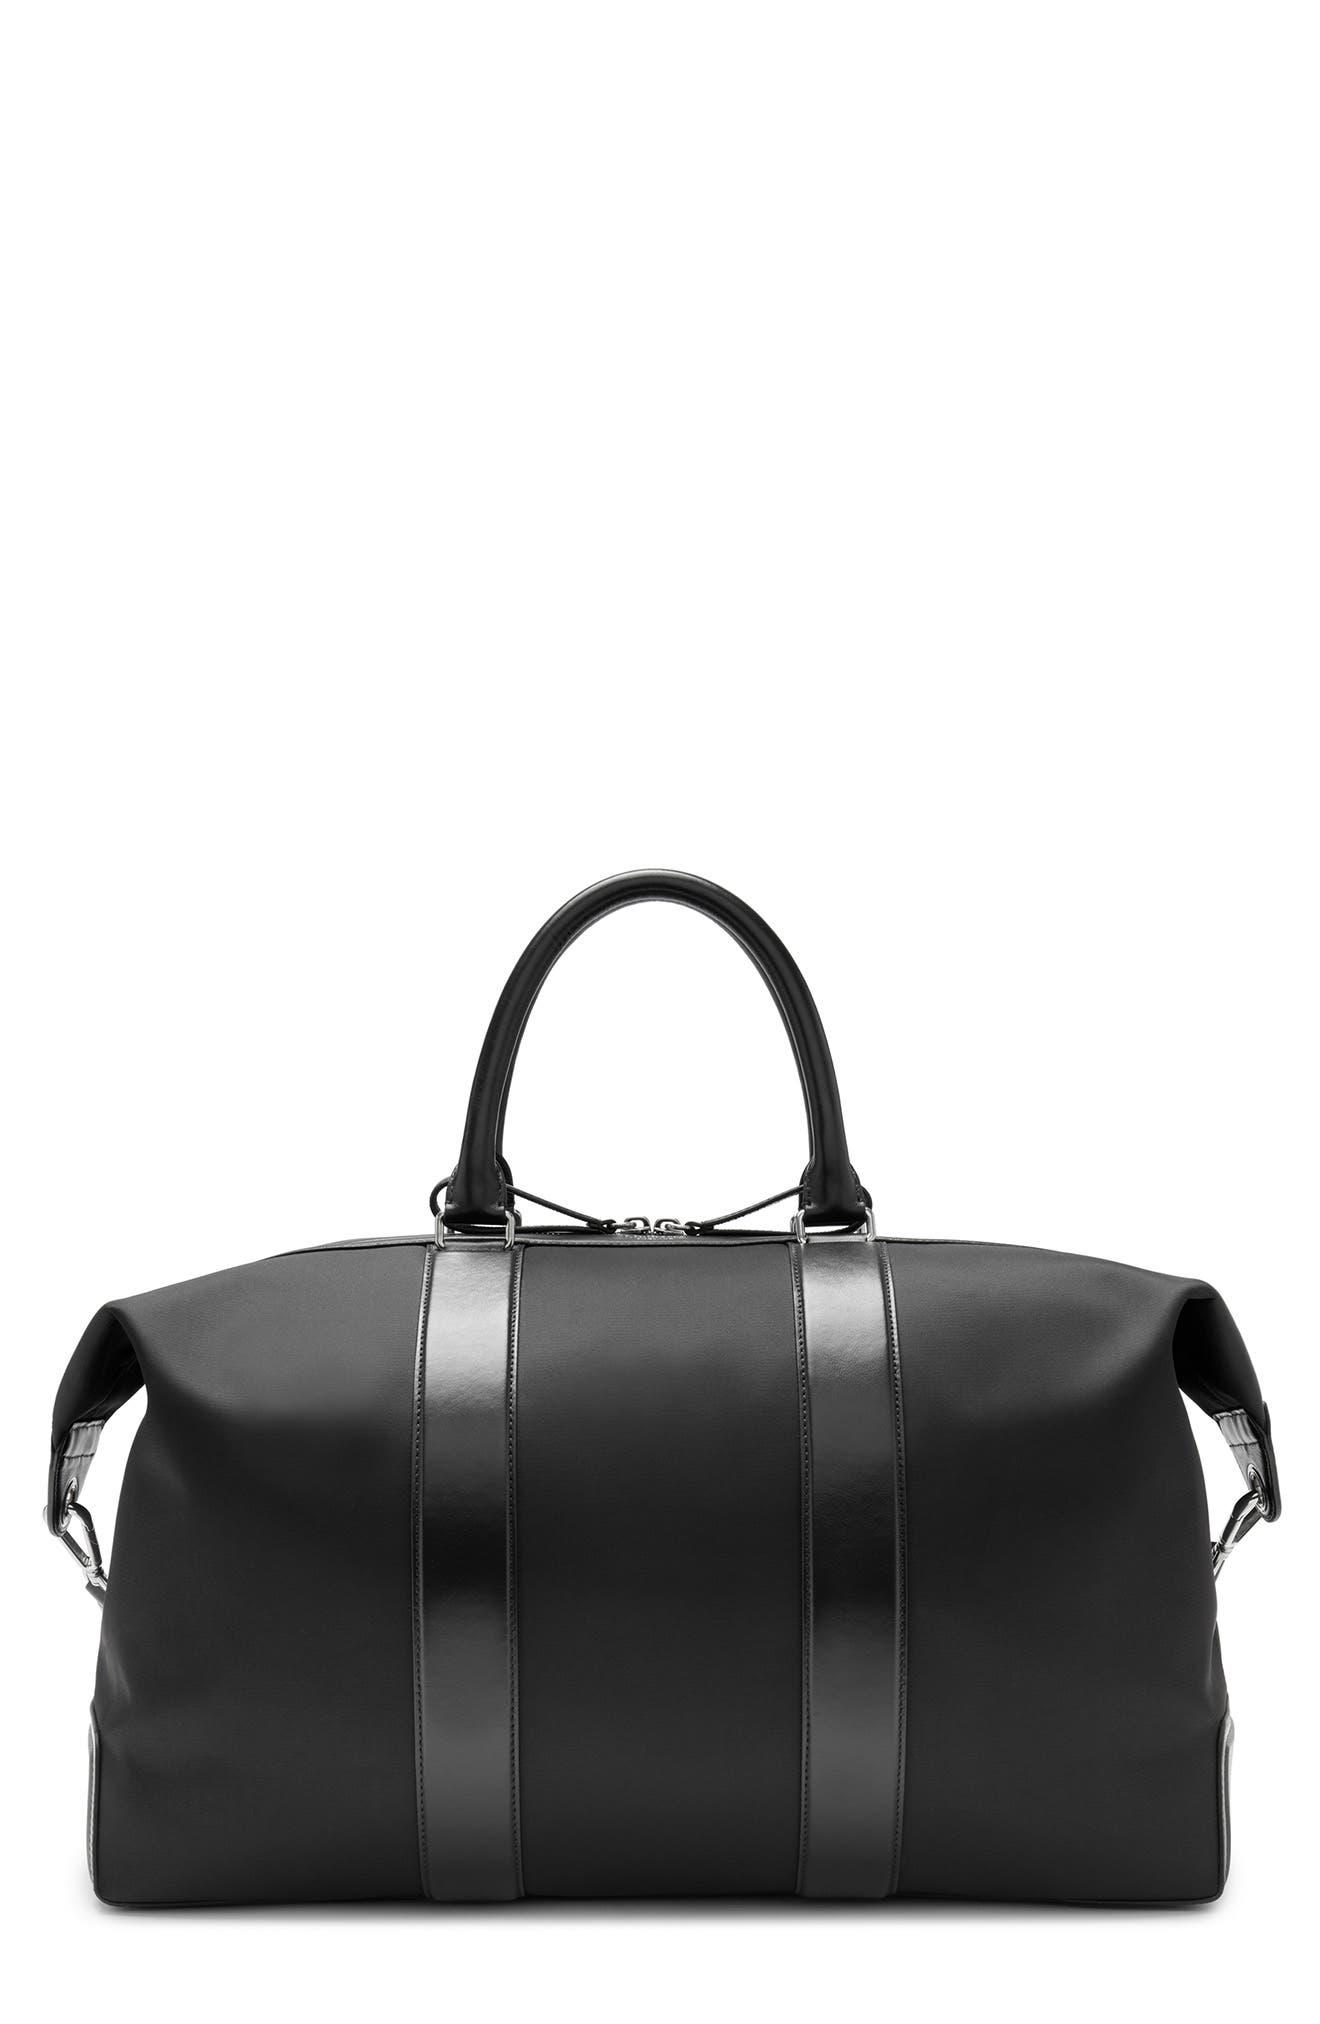 Mulberry Econyl® Zipped Duffle Bag in Black | Lyst